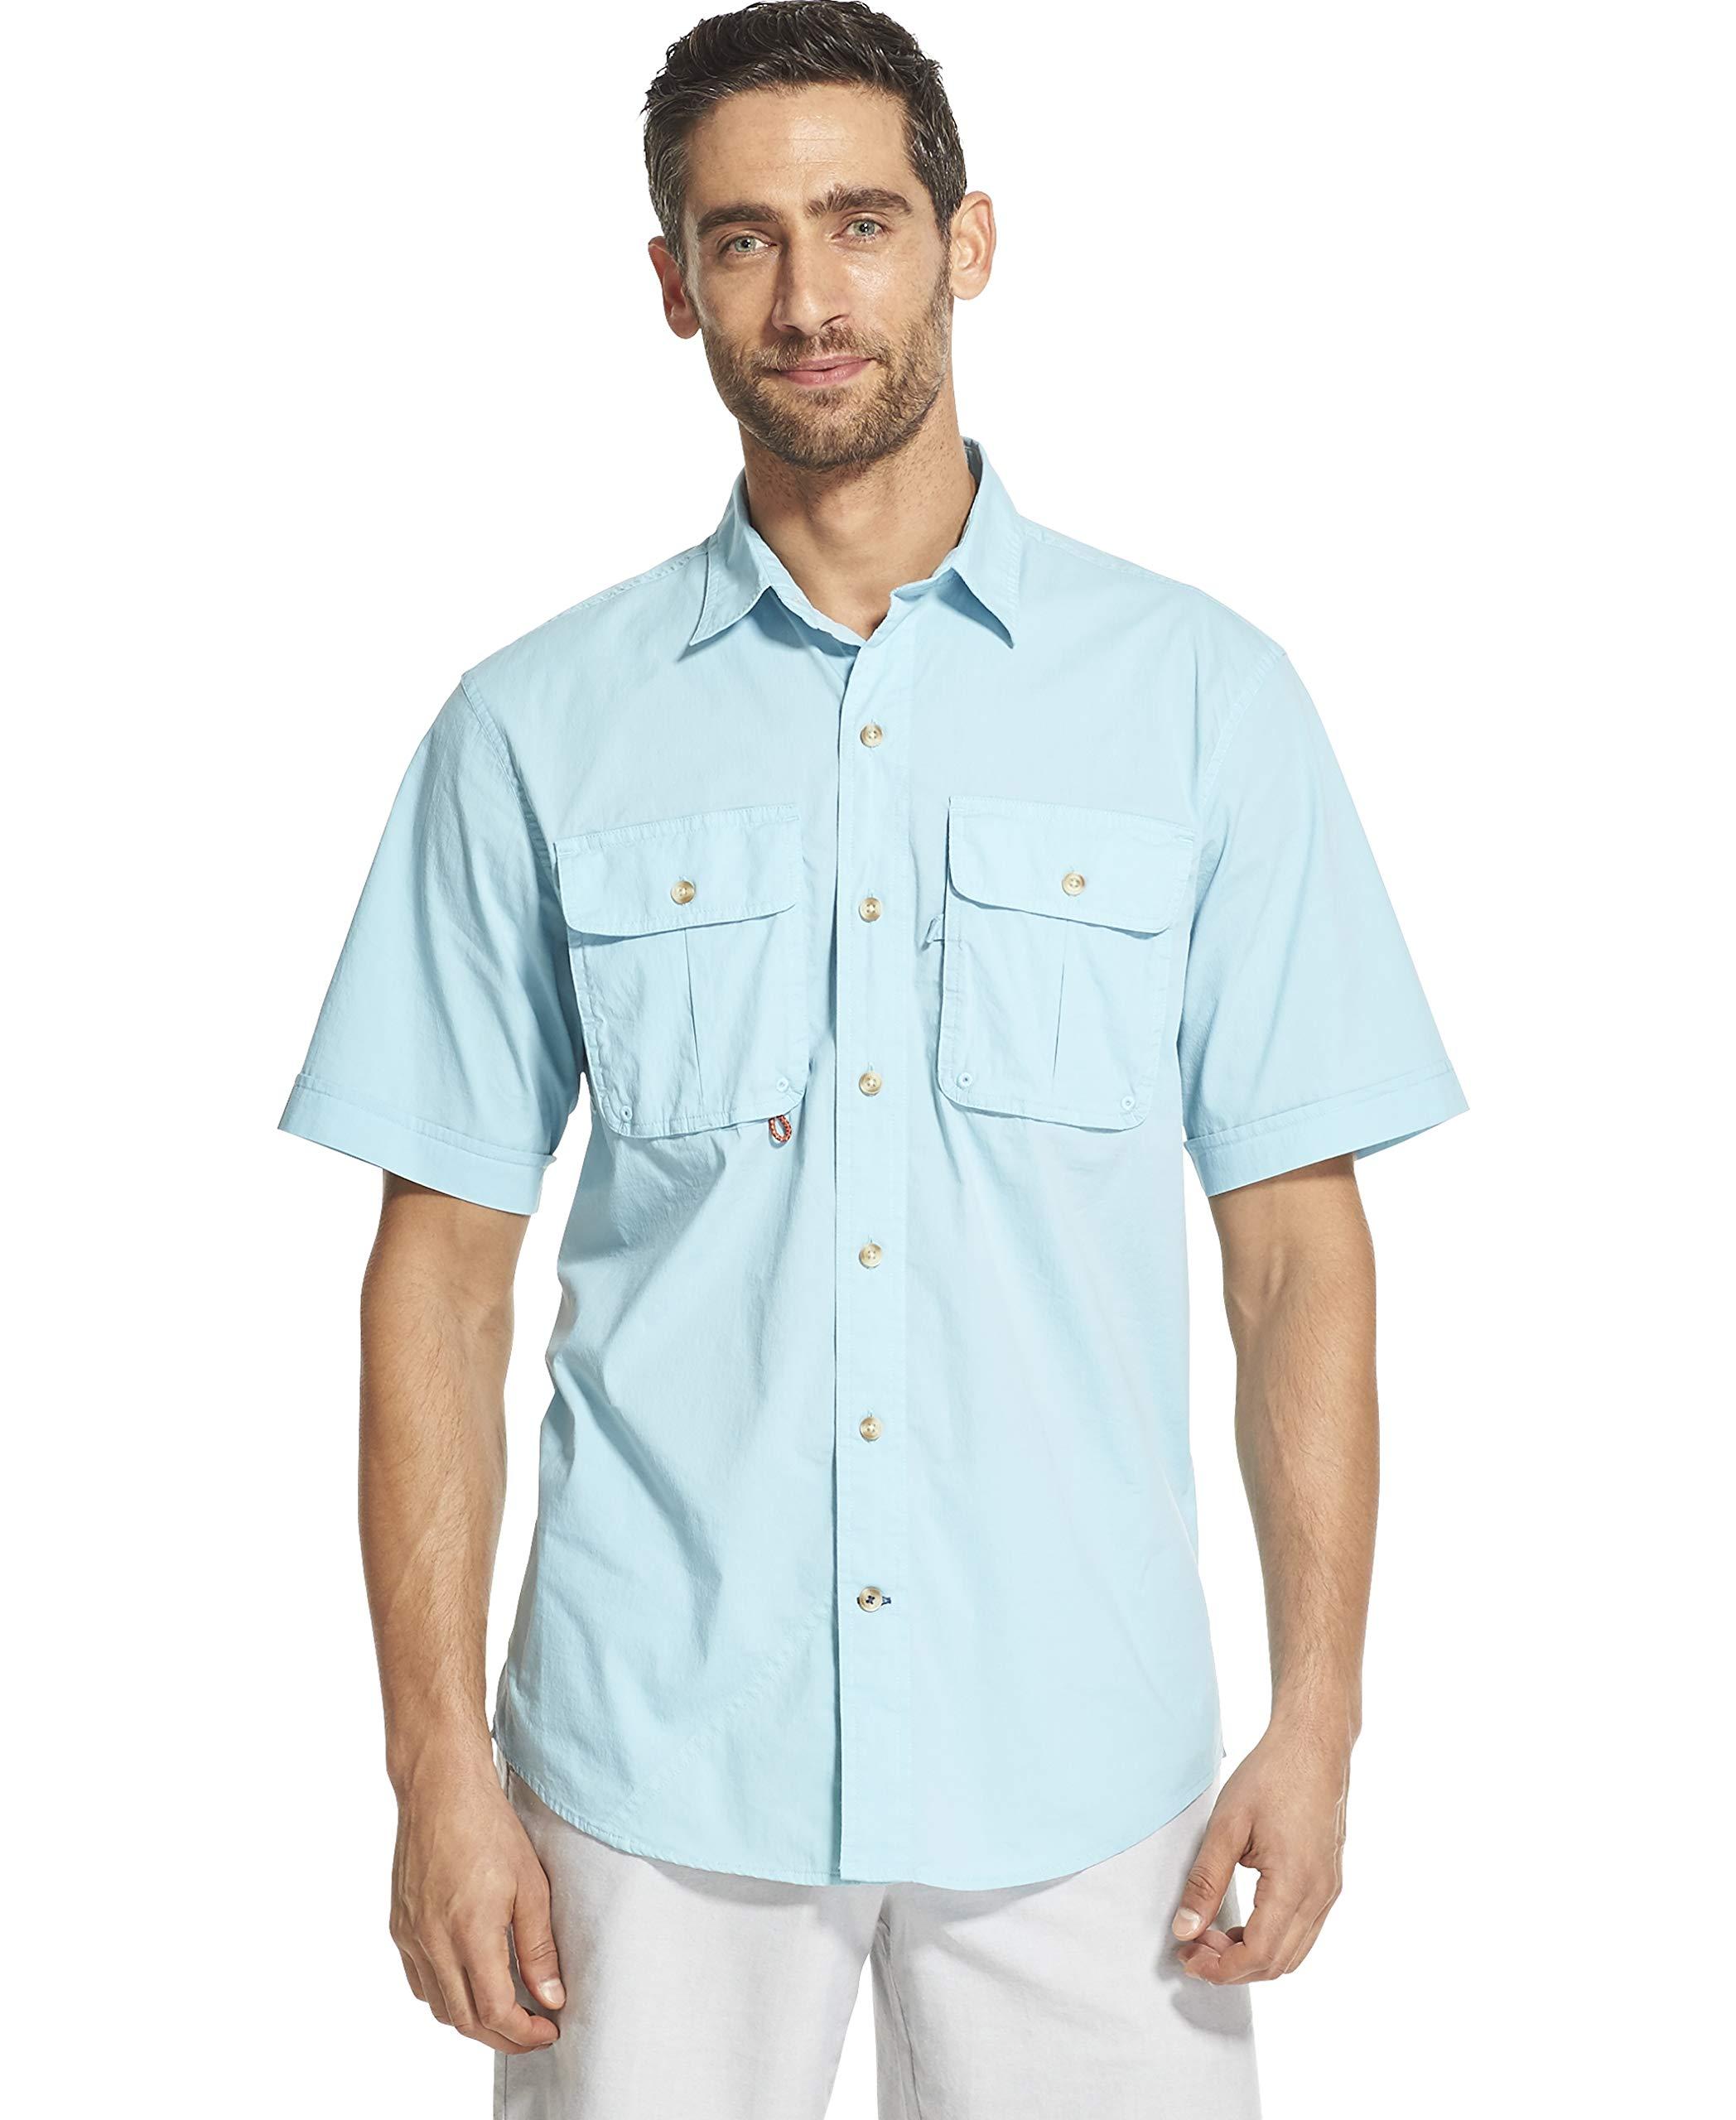 Izod Surfcaster Short Sleeve Button Down Solid Fishing Shirt in